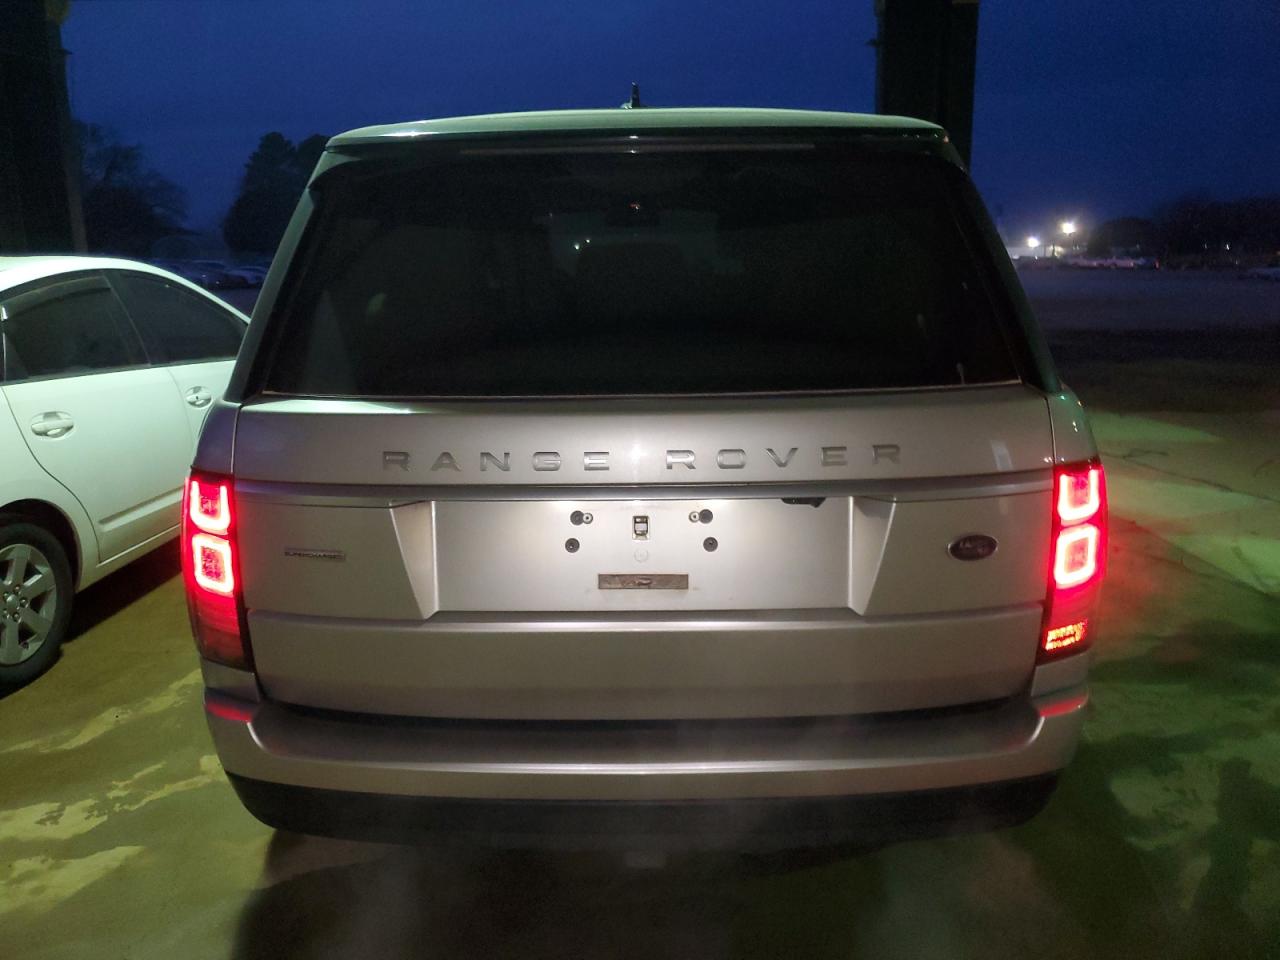 SALGS3EF7GA****** Salvage and Repairable 2016 Land Rover Range Rover in Alabama State